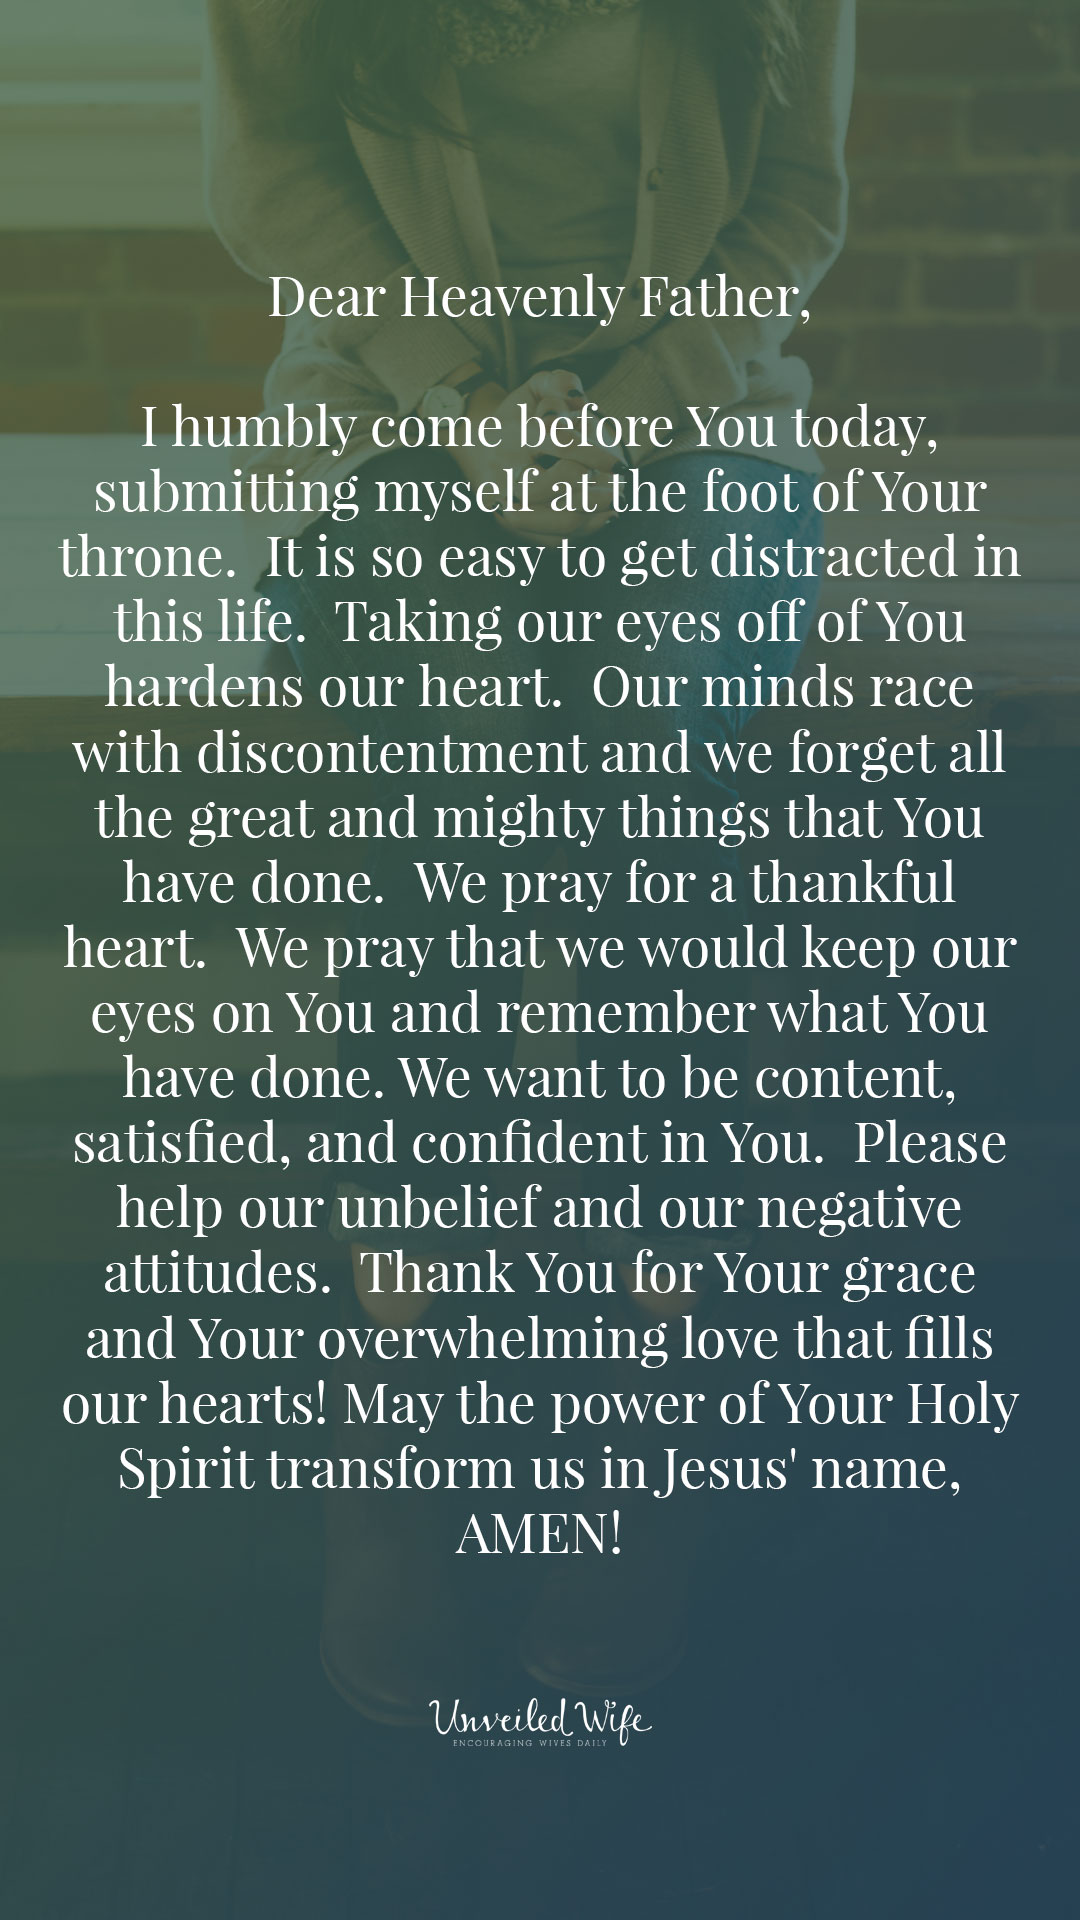 Prayer Of The Day - Having A Thankful Heart